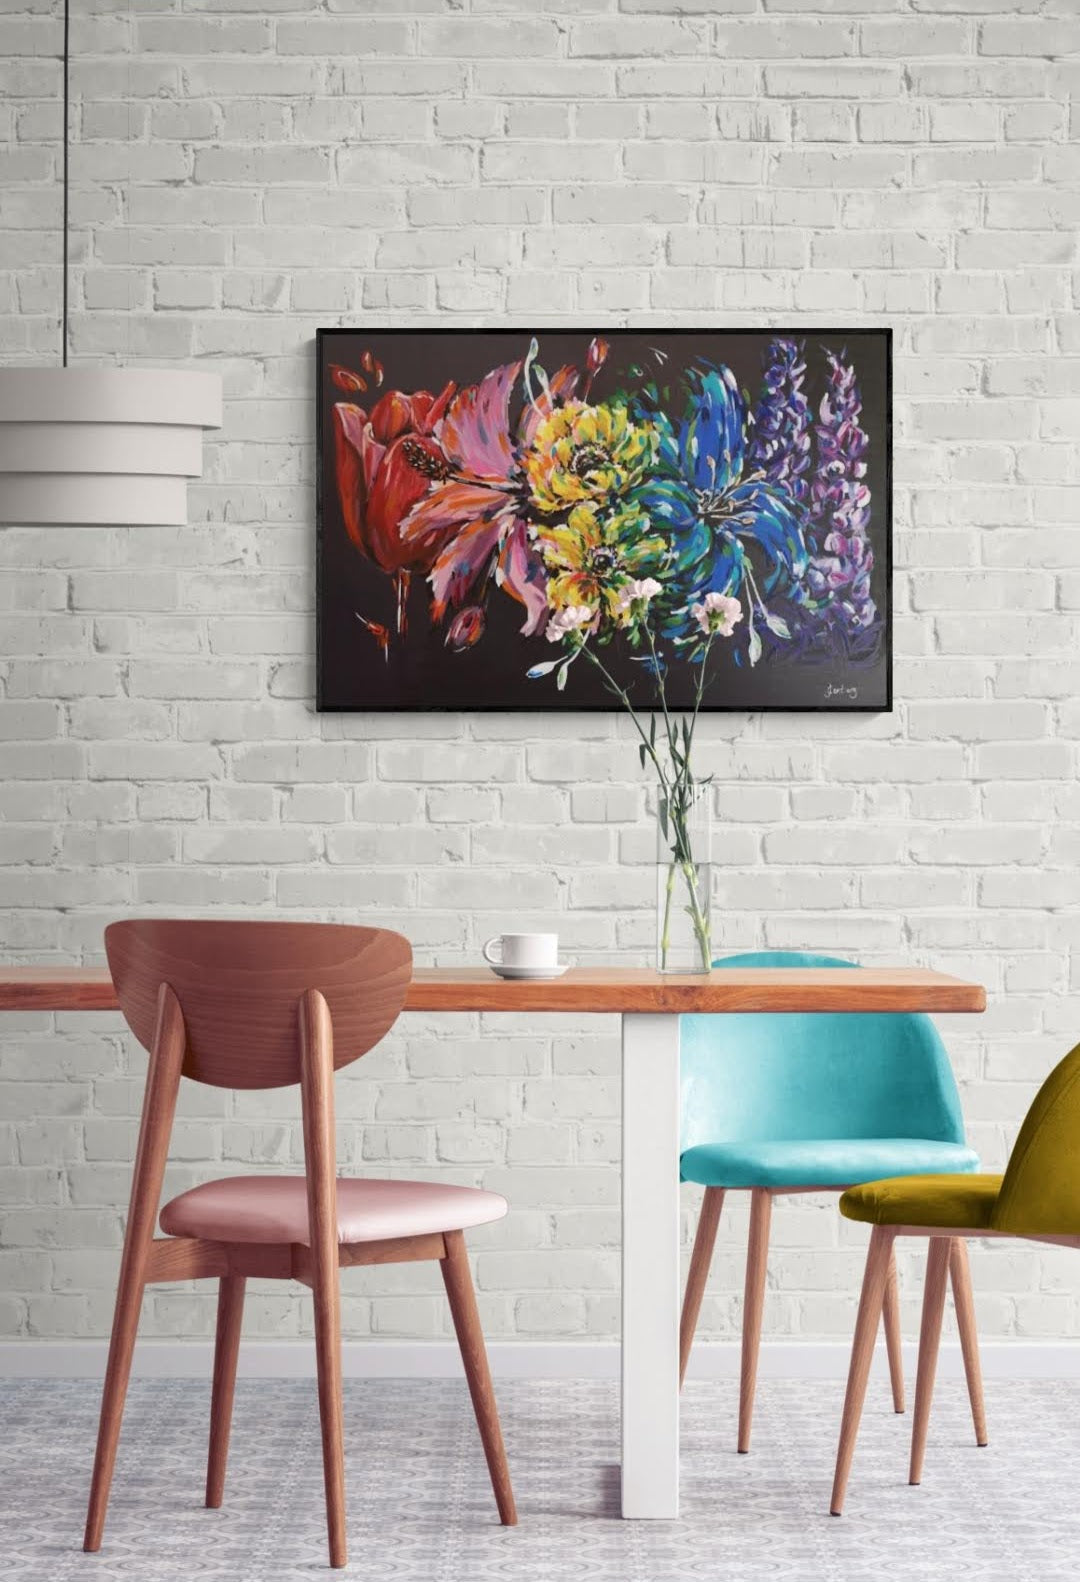 Multi-coloured abstract Carnival Rainbow flower painting on contrasting black background by Judy Century Art.  home decor inspiration wall art shown on white brick wall above wooden dining table with colourful blue, mustard yellow and blush pink chairs